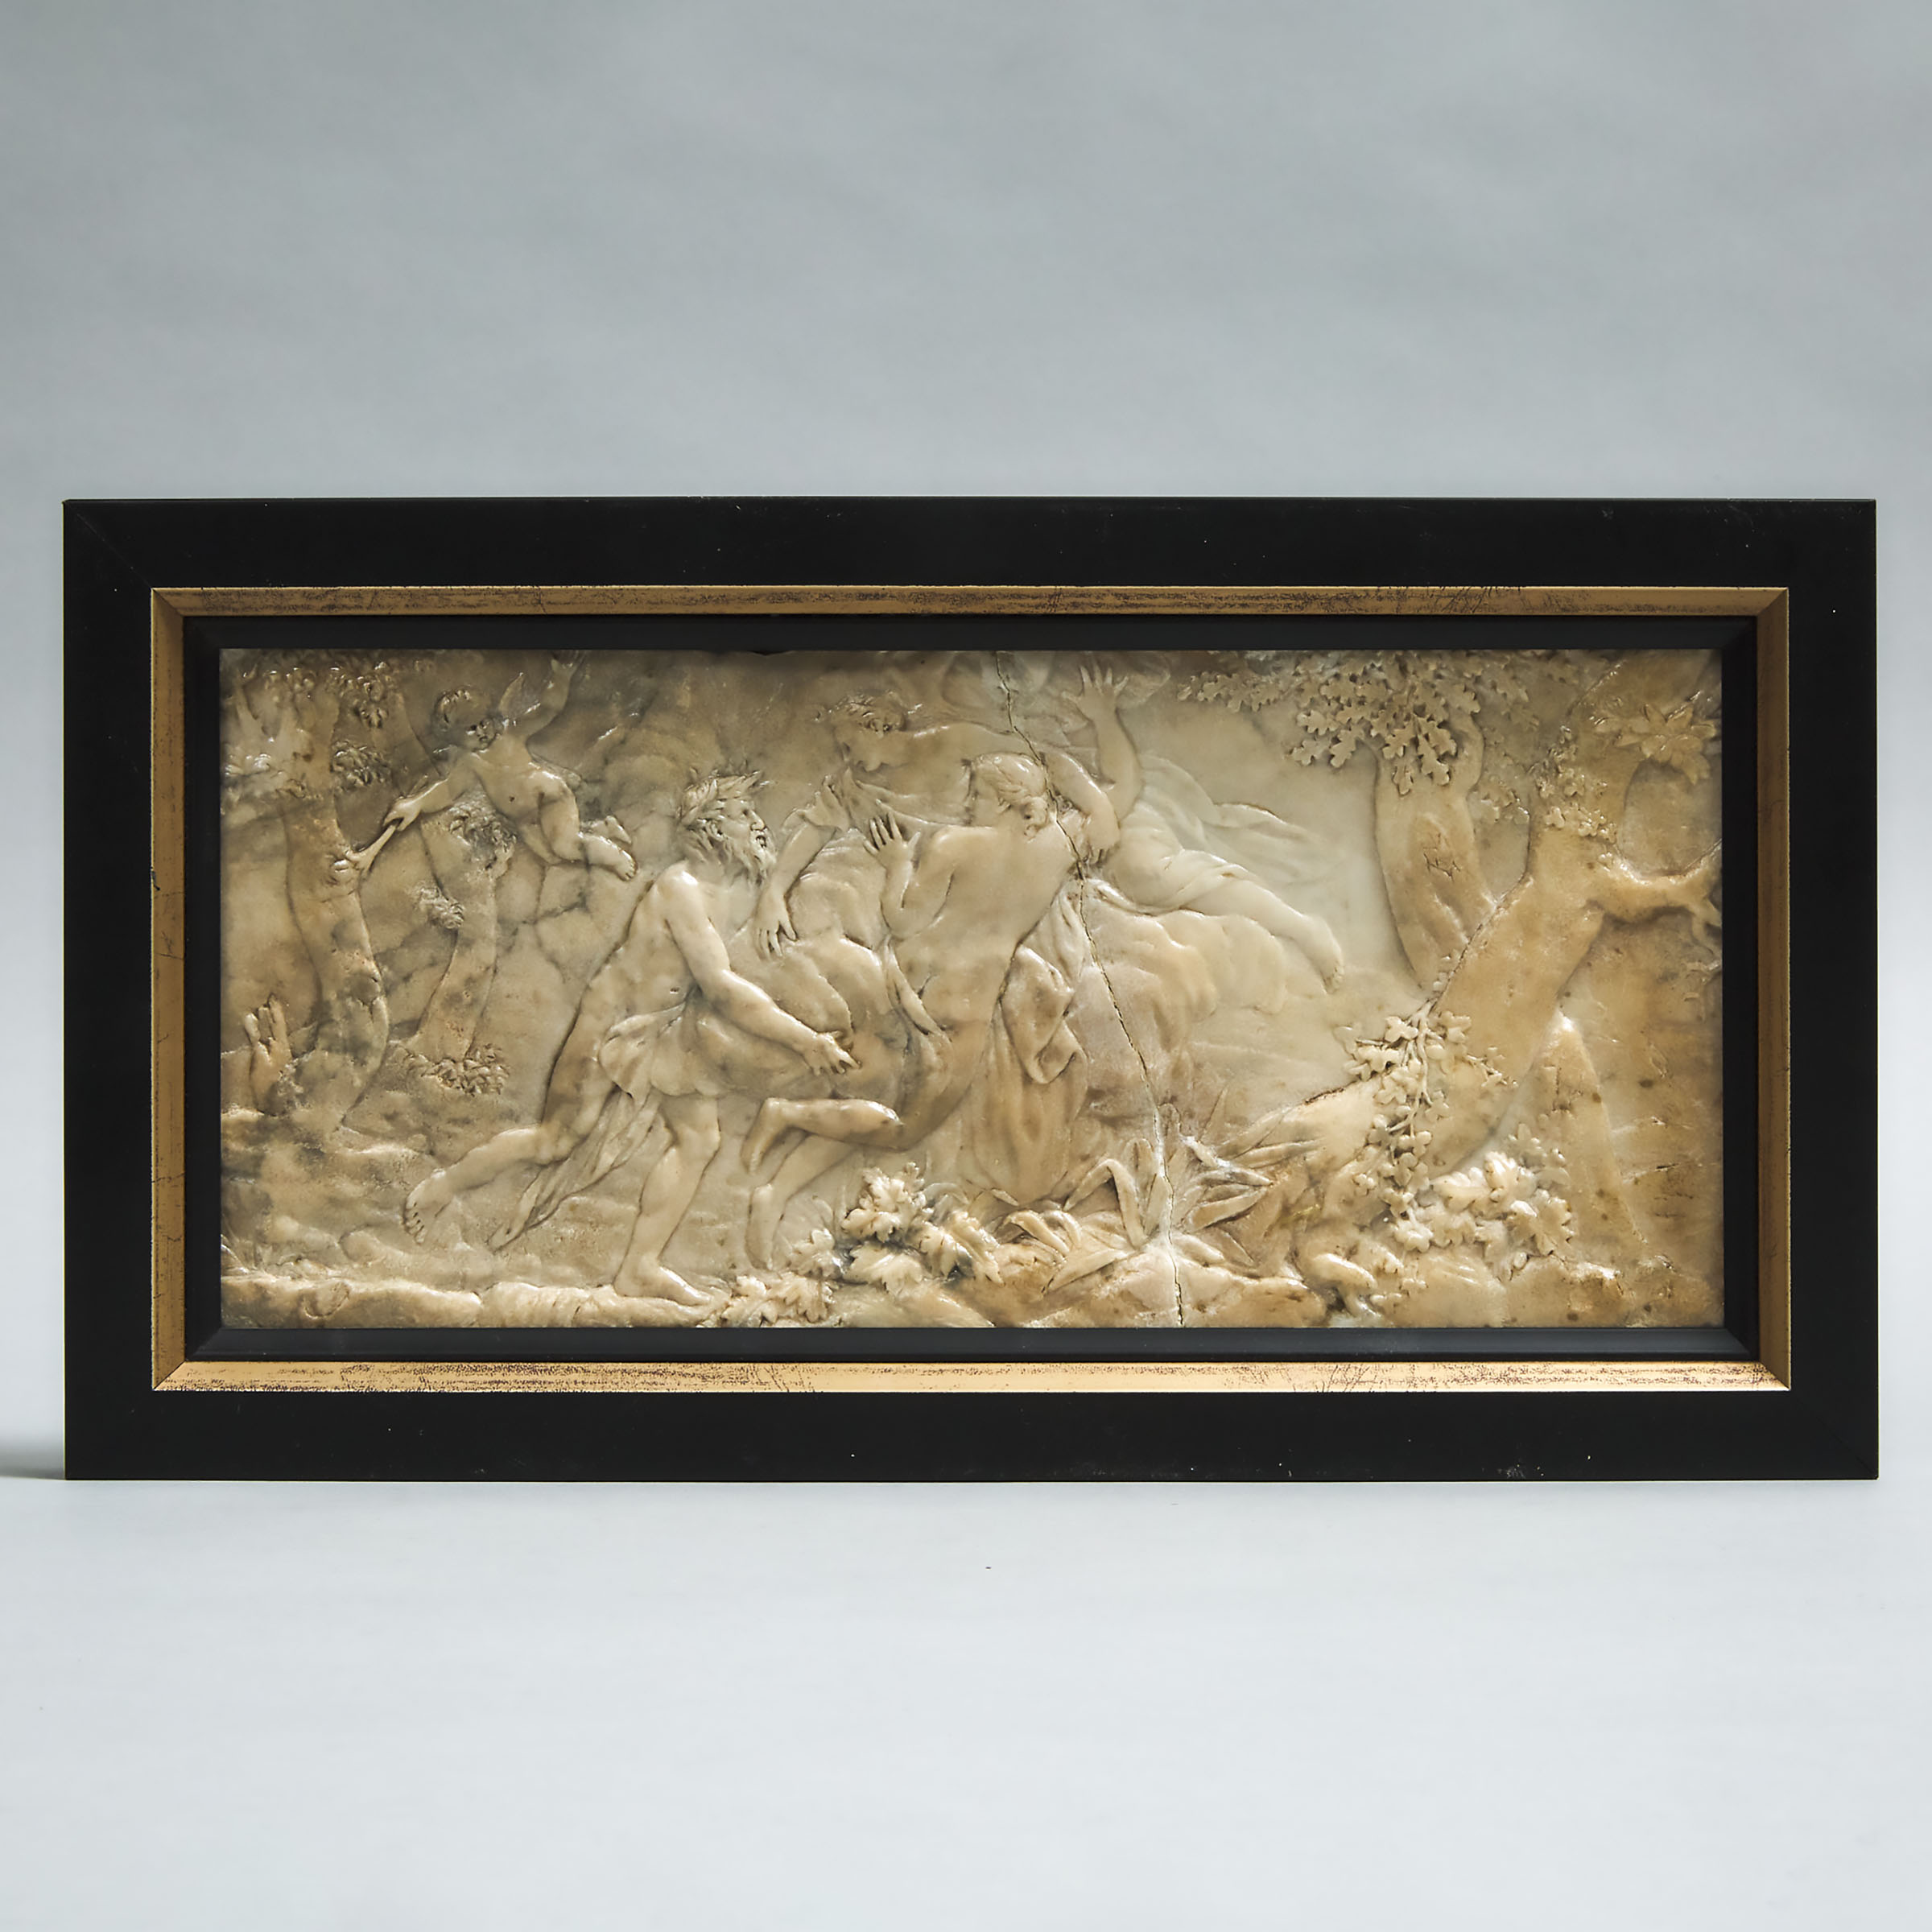 Roman Mythological Marble Relief Panel of Endymion and Selene, 18th century or earlier